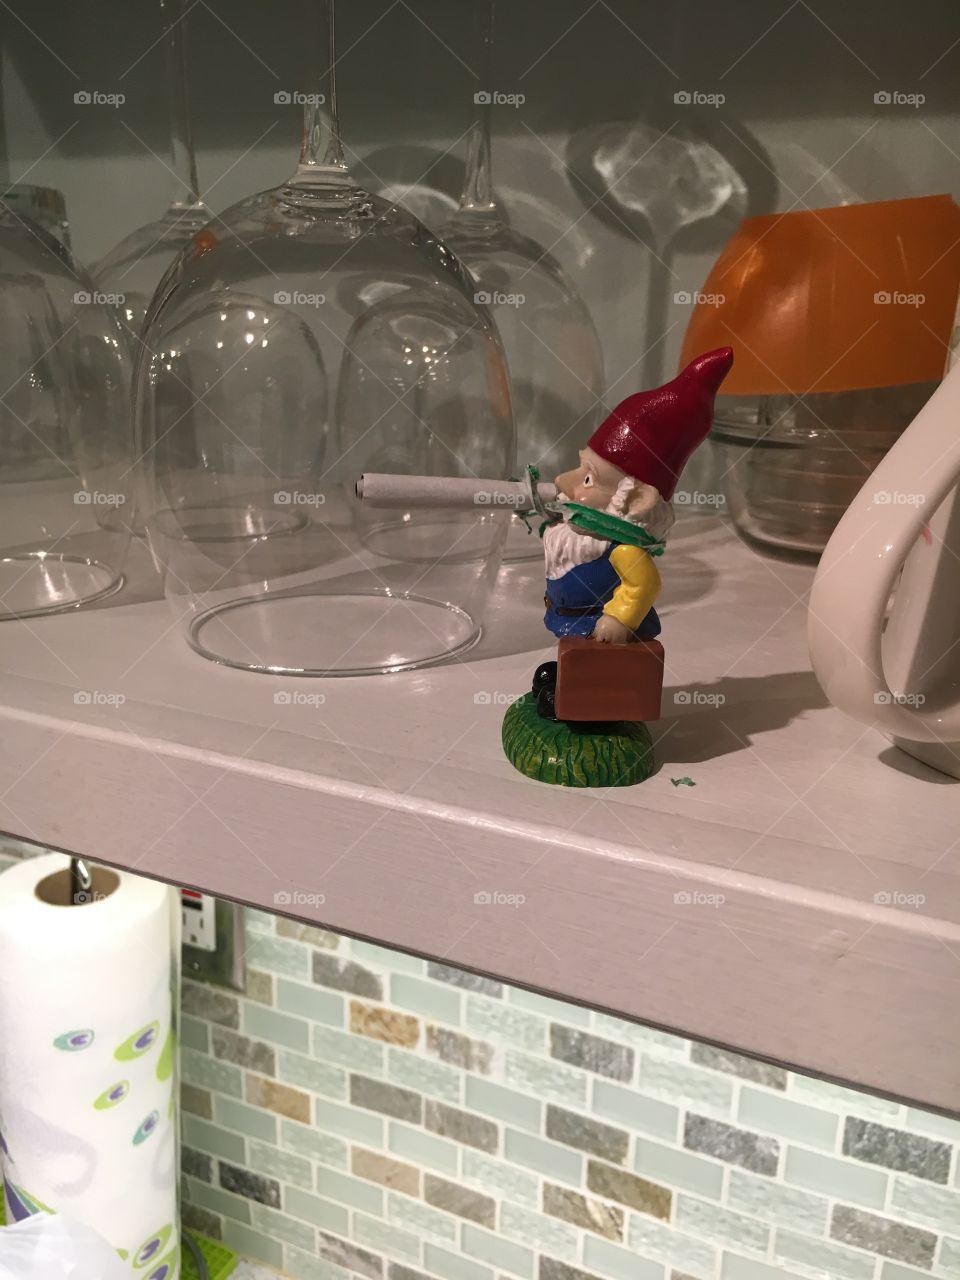 Gnomey taking up smoking, considering this Airbnb was encased in new and old nicotine. 